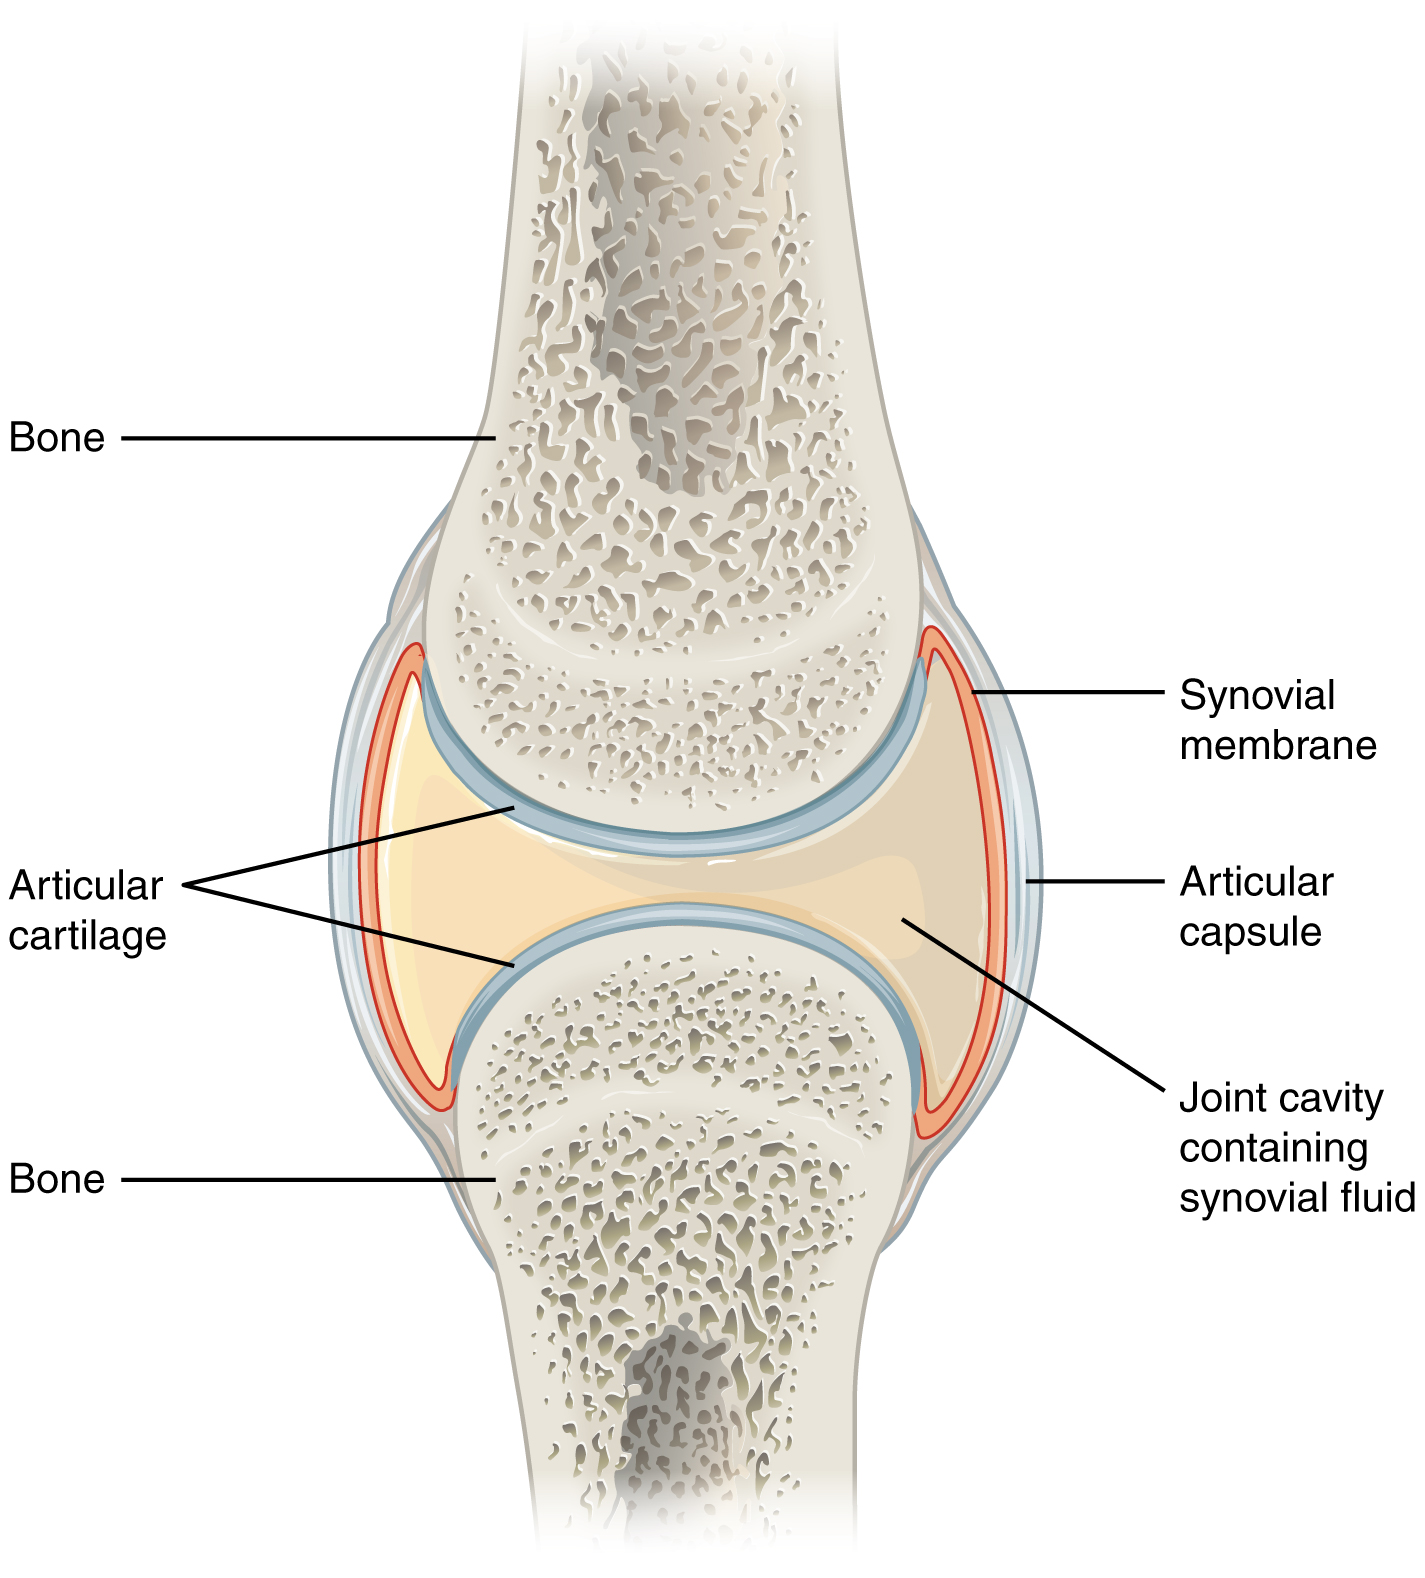 This figure shows a synovial joint. The cavity between two bones